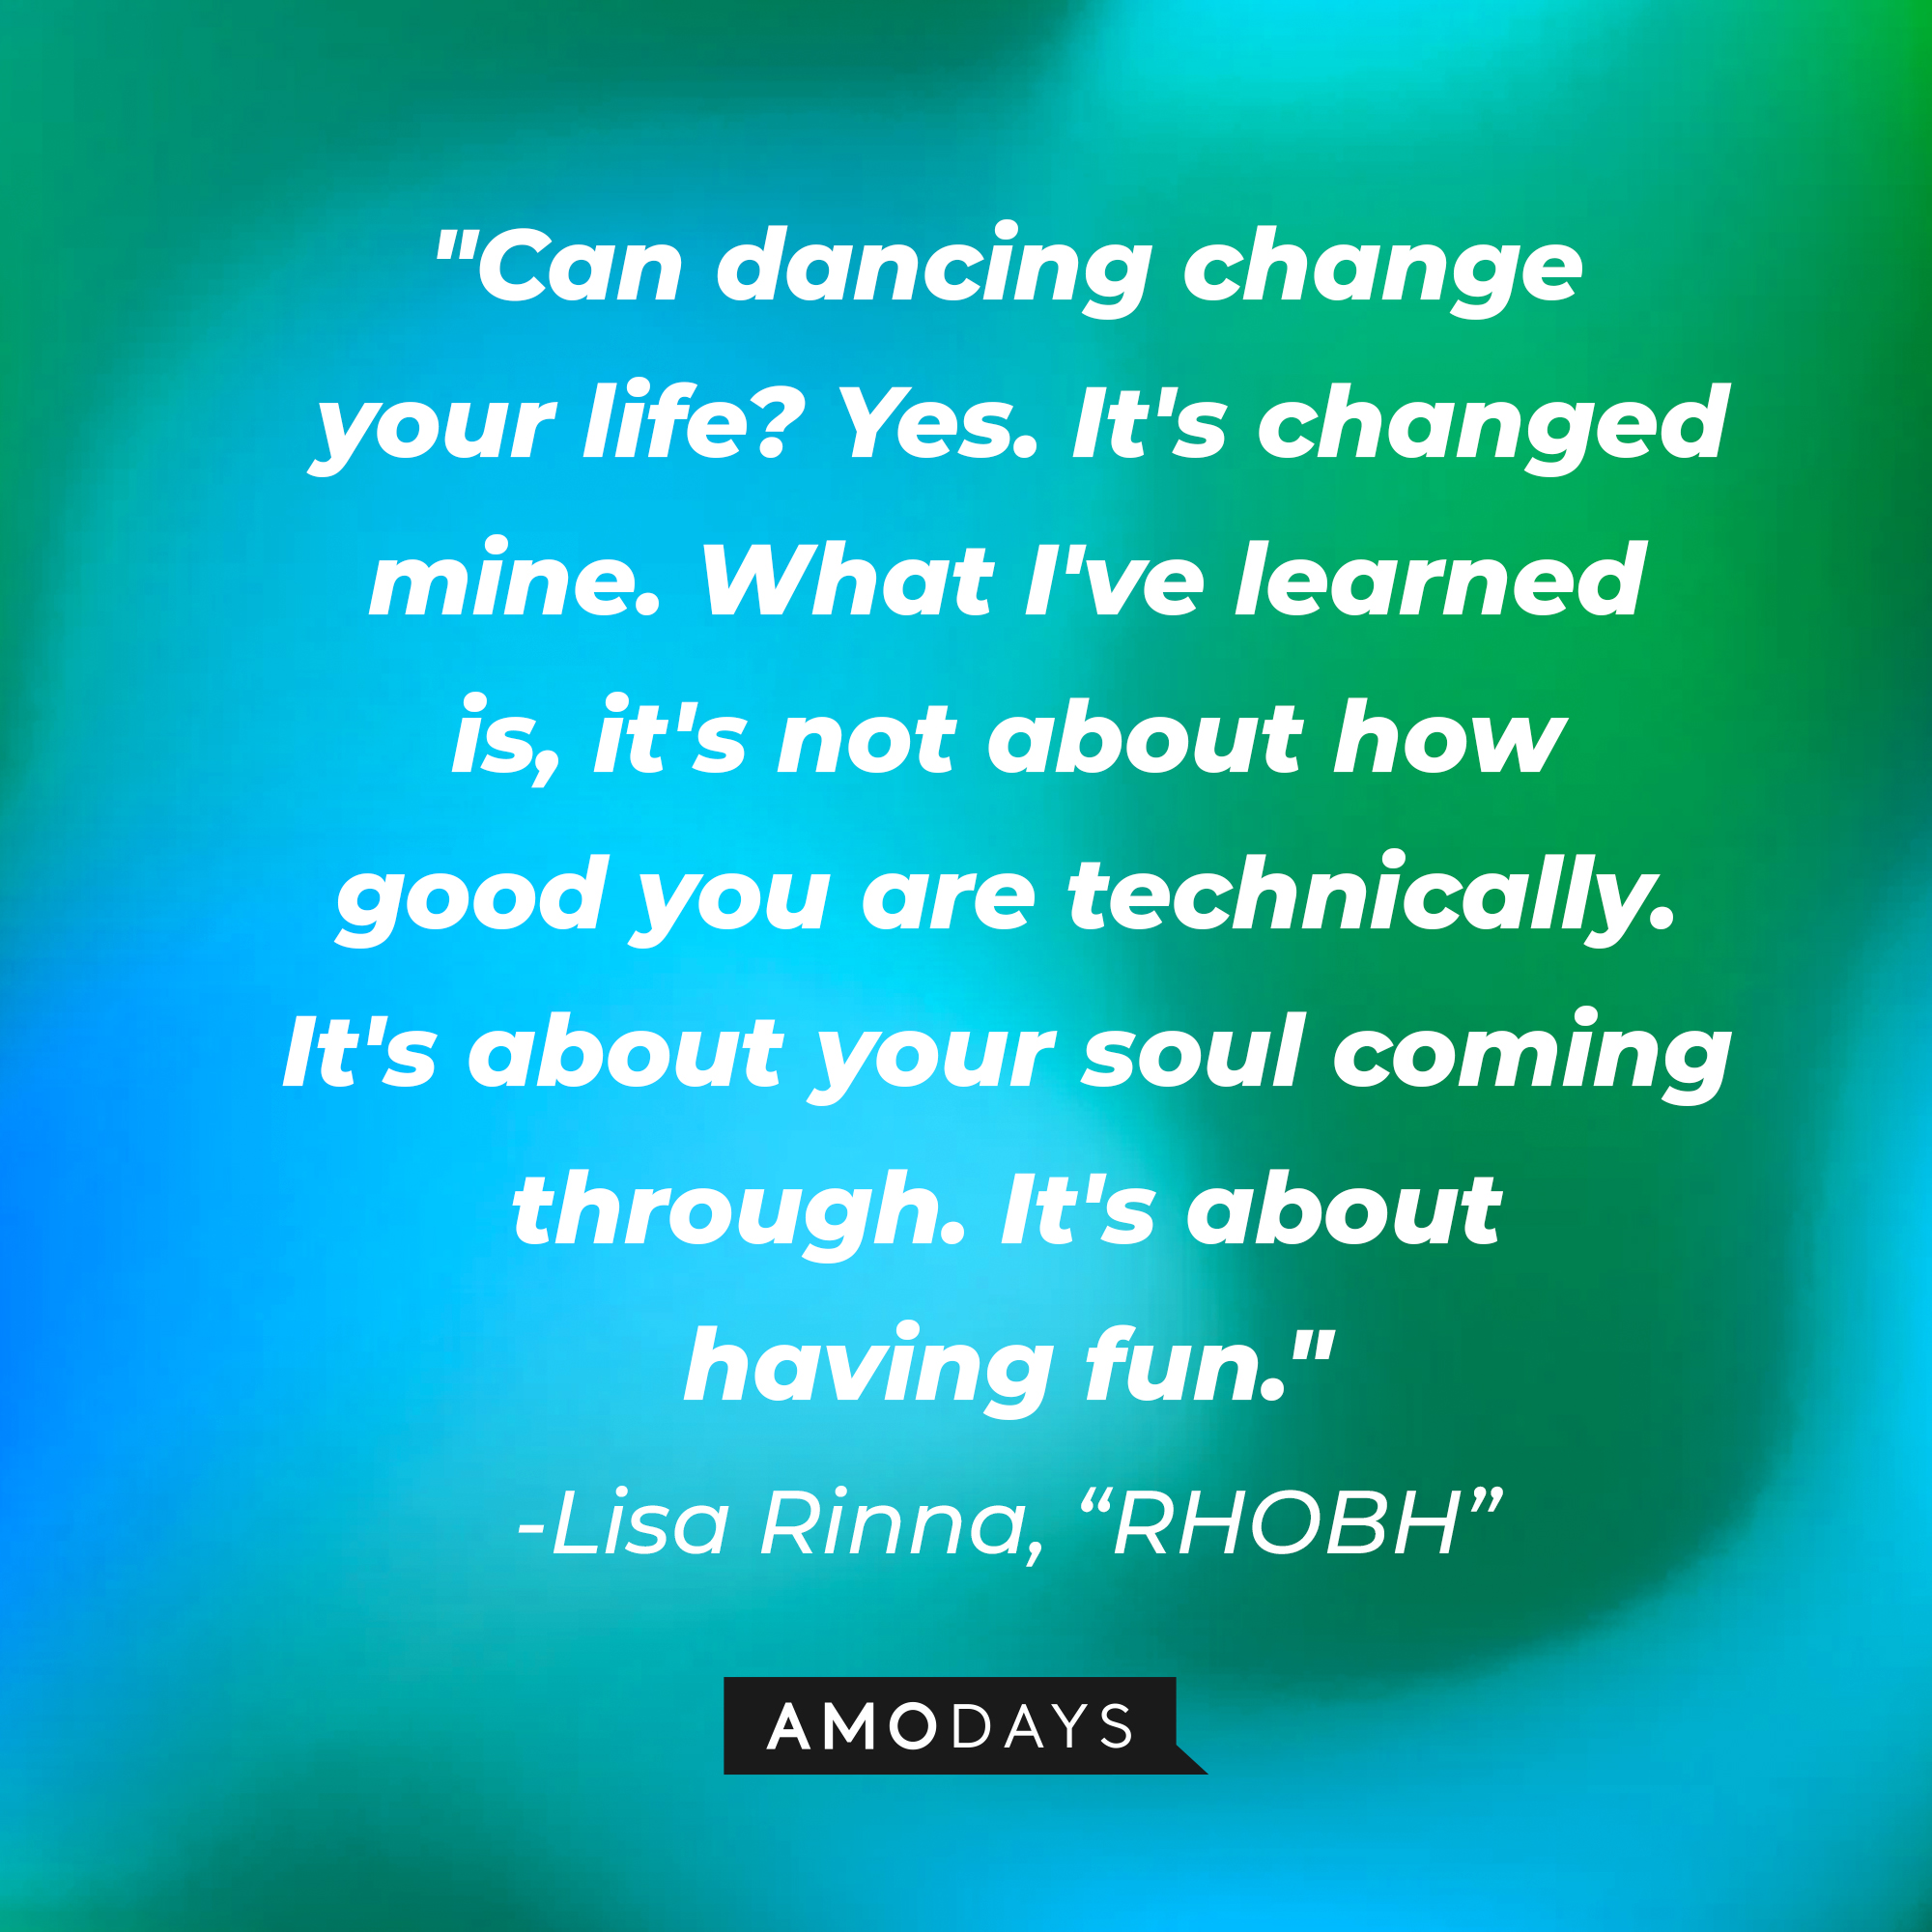 Lisa Rinna's quote from "The Real Housewives of Beverly Hills:" "Can dancing change your life? Yes. It's changed mine. What I've learned is, it's not about how good you are technically. It's about your soul coming through. It's about having fun." | Source: AmoDays